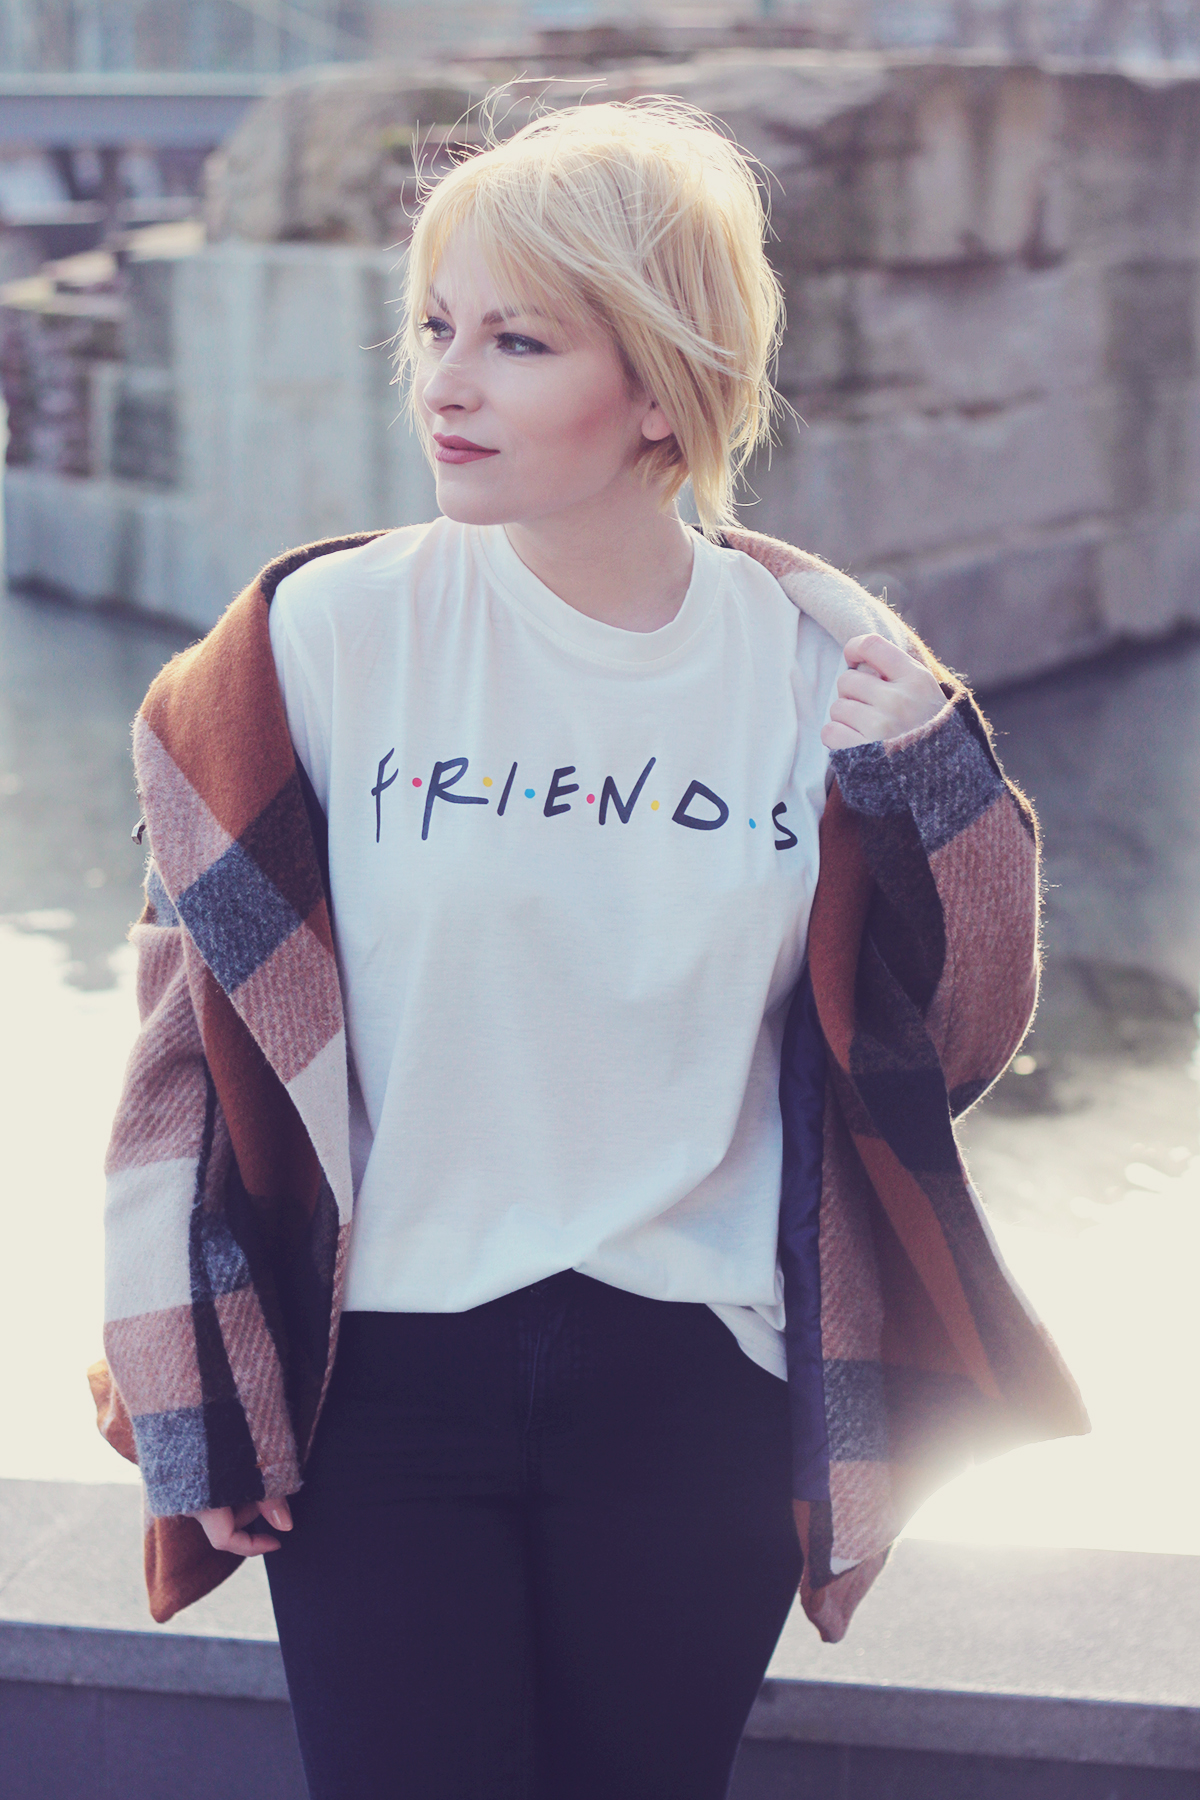 Friends t-shirt, plaid coat, jeans, short blonde bob, winter, spring, spring fashion, street style, casual